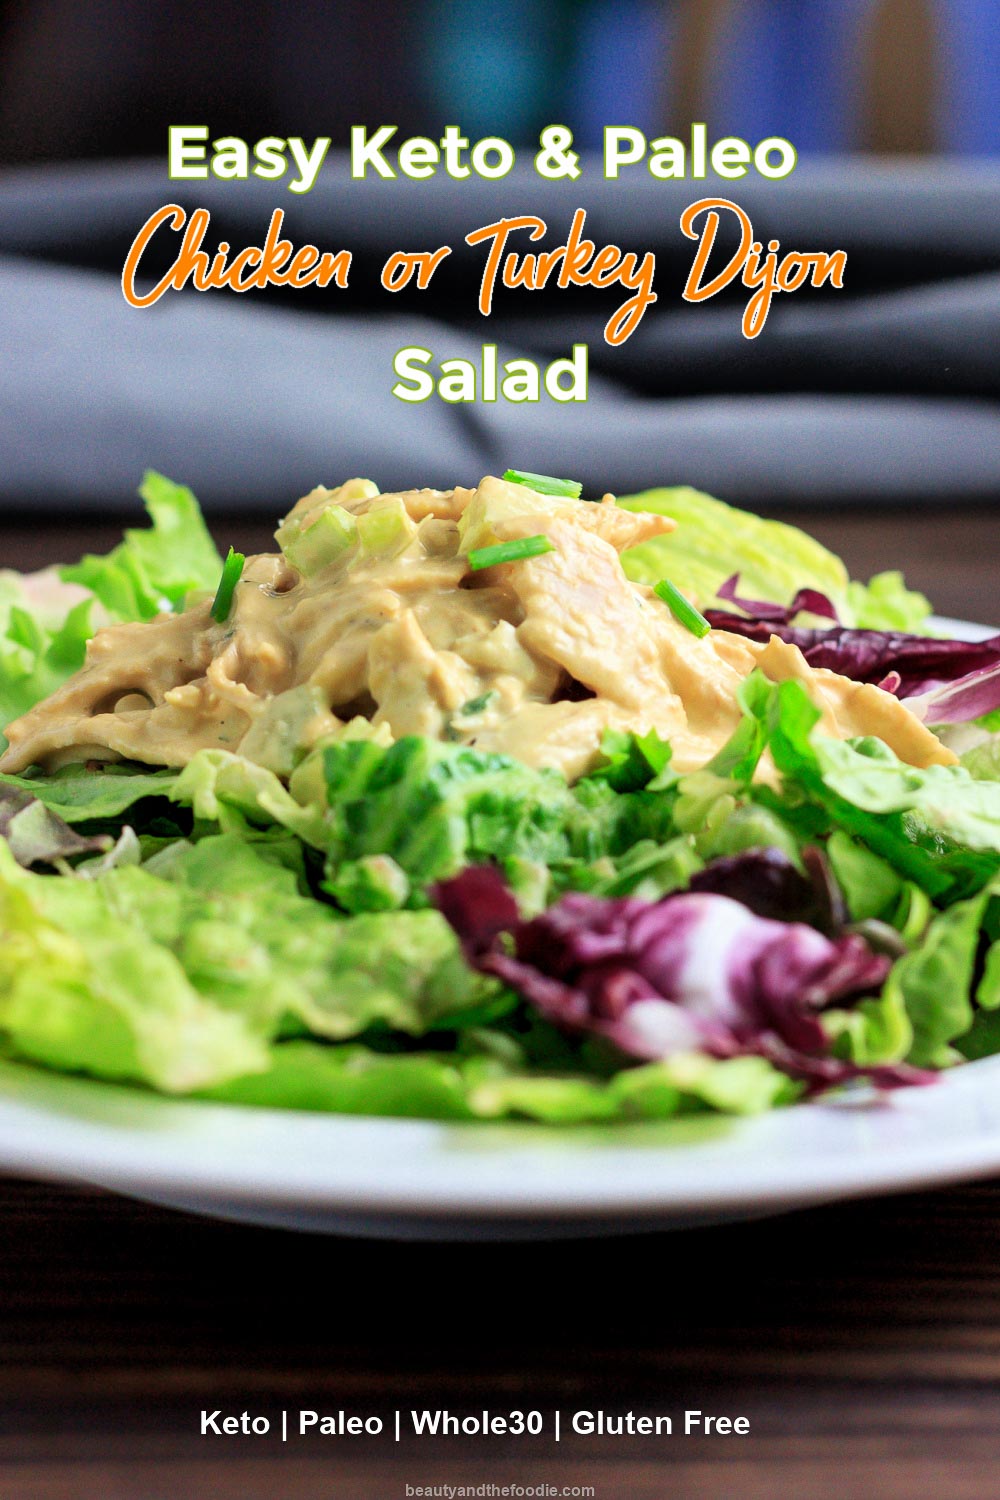 Chicken Salad with mixed greens